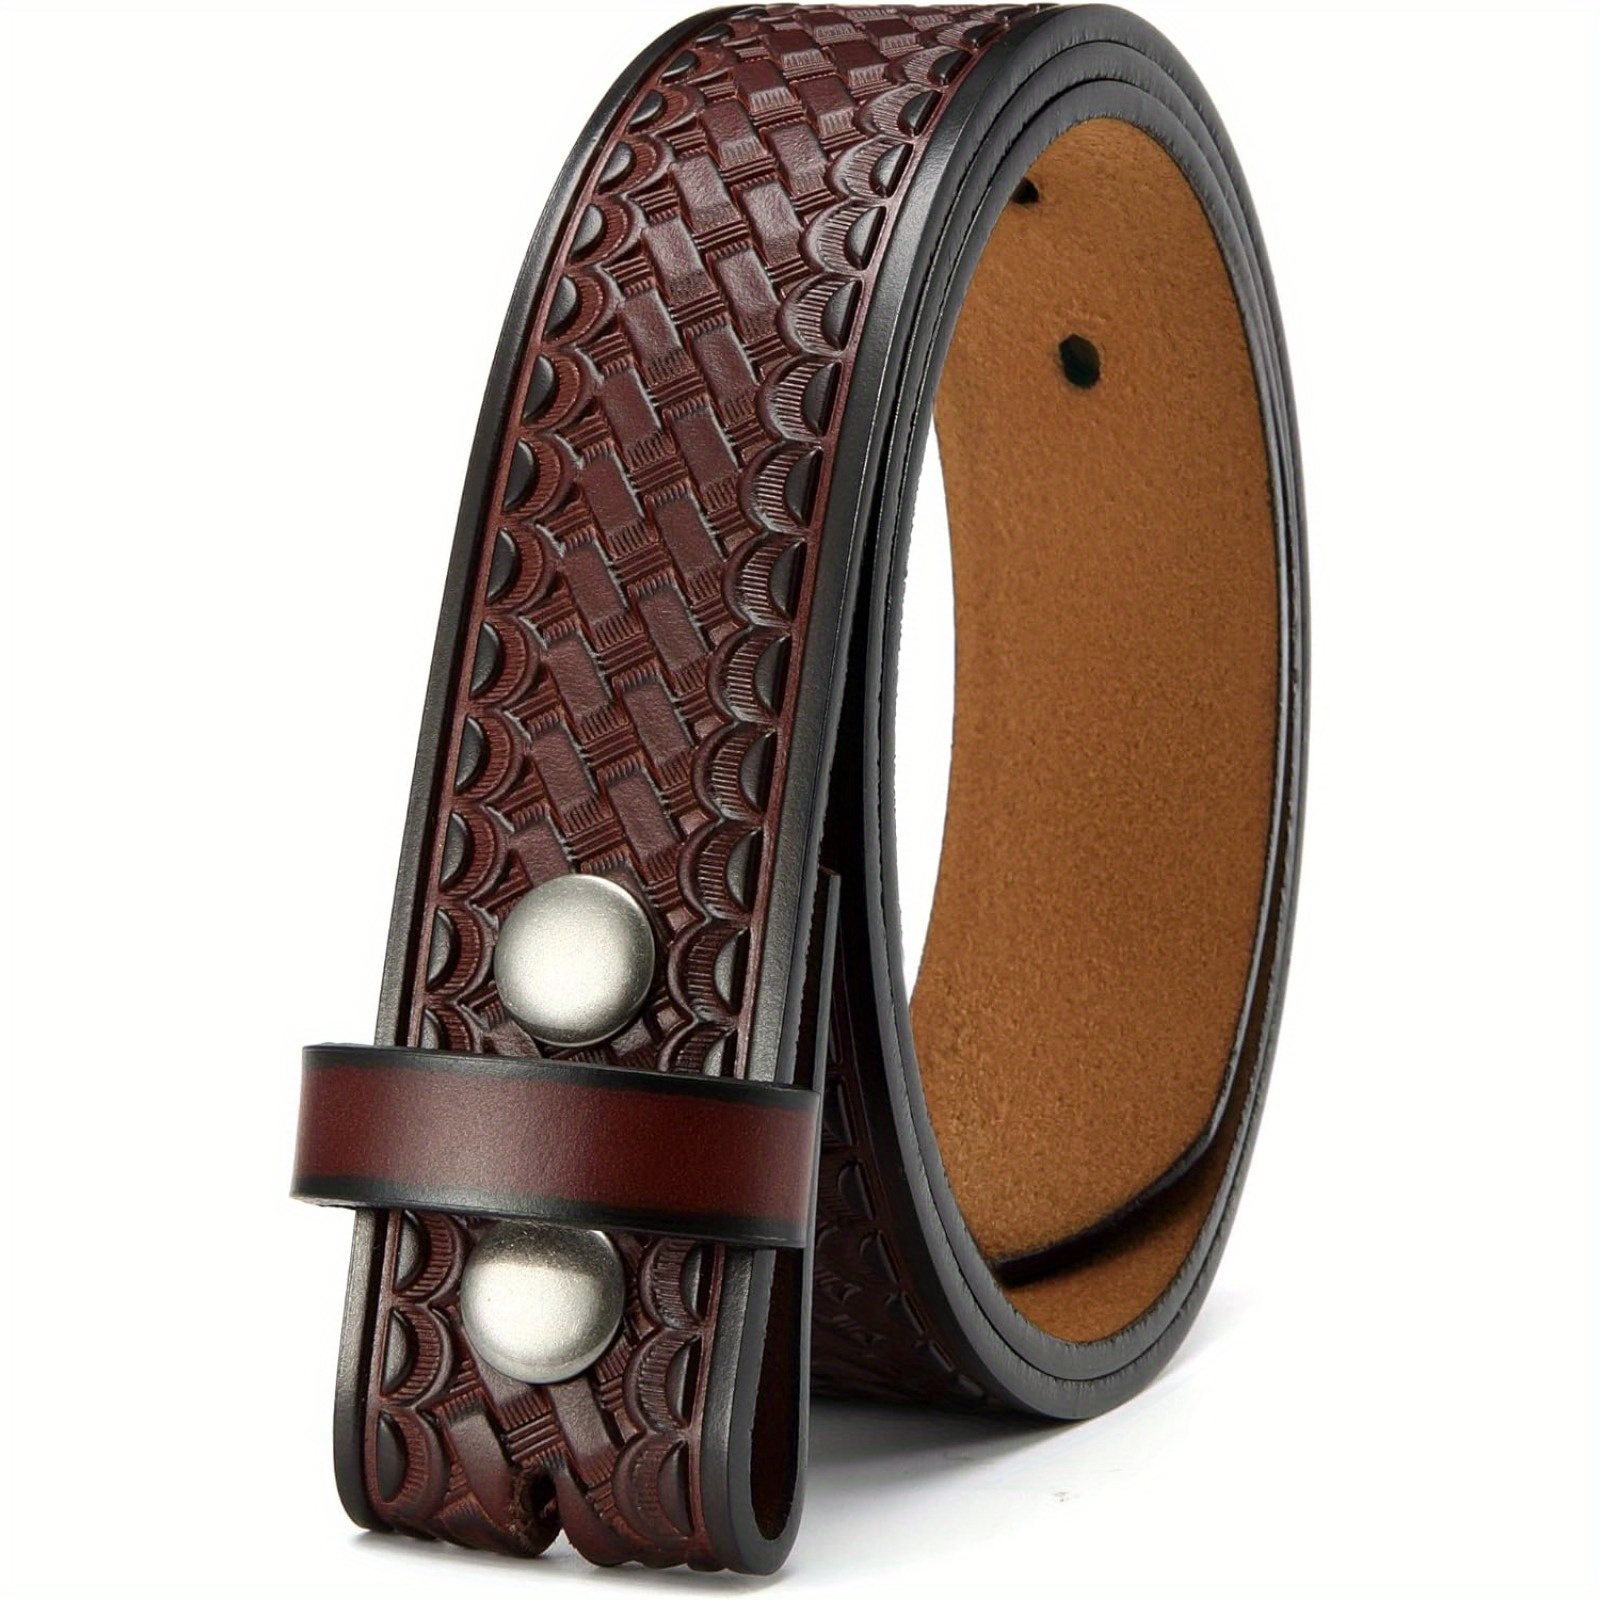 

Chaoren Western Belts For Men Without Buckle - Cowboy Belt 1.5" Full Grain Leather Belt For Jeans - 1 Solid Piece Leather